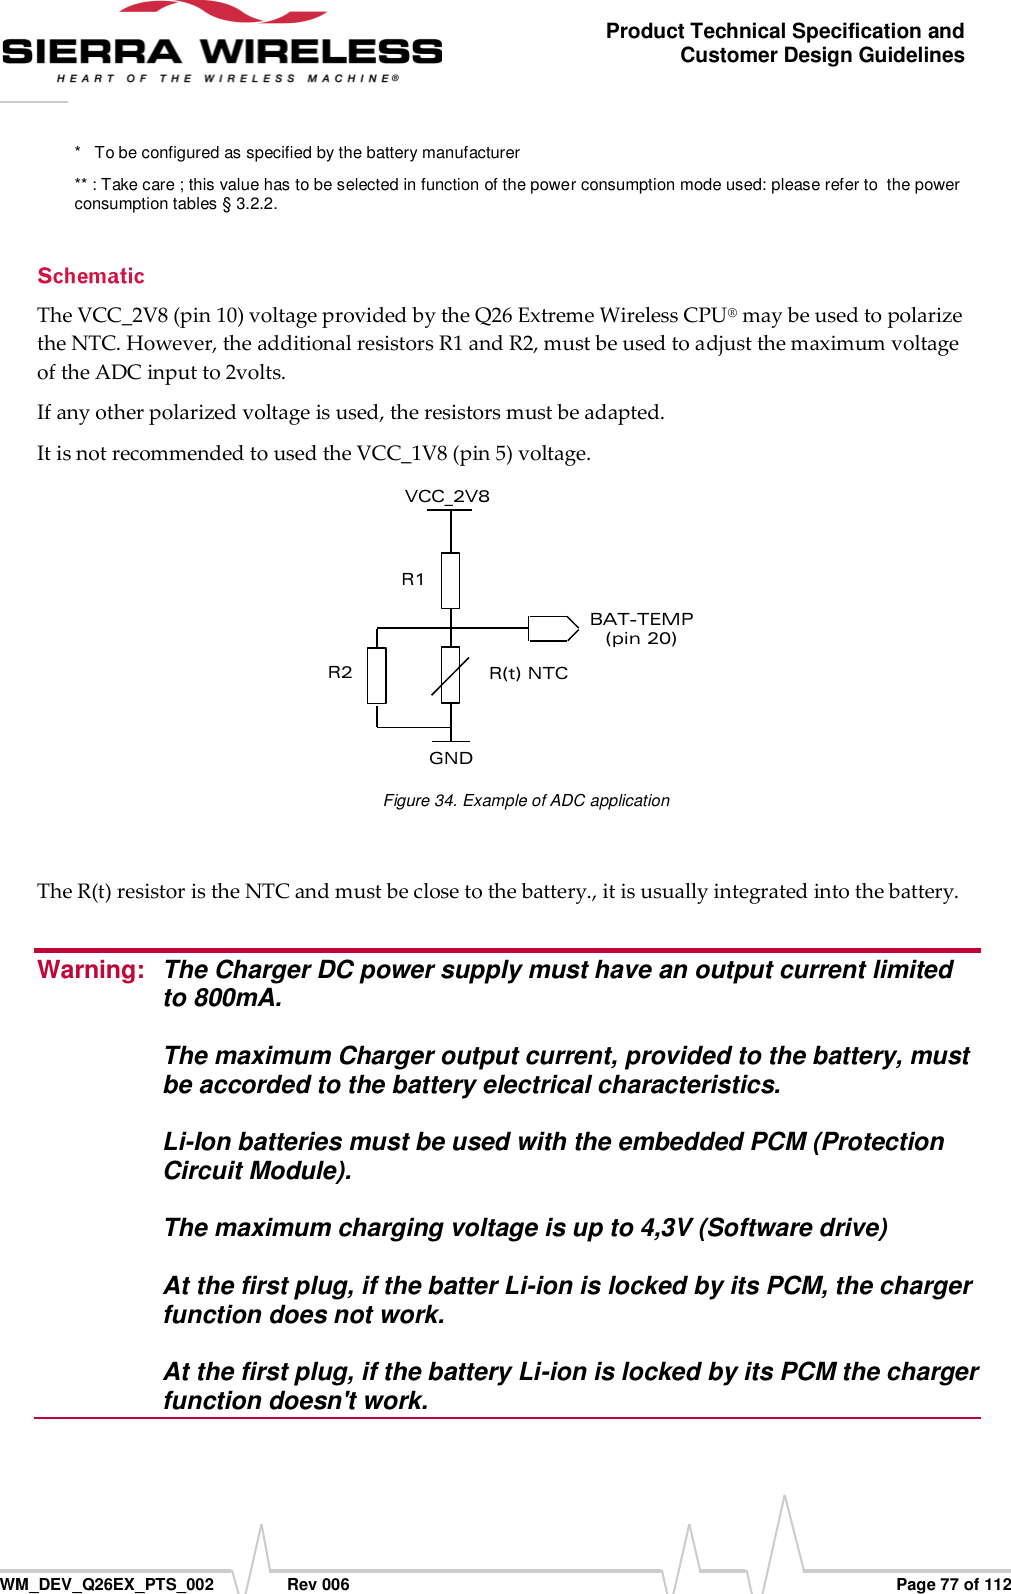      WM_DEV_Q26EX_PTS_002  Rev 006  Page 77 of 112 Product Technical Specification and Customer Design Guidelines *   To be configured as specified by the battery manufacturer ** : Take care ; this value has to be selected in function of the power consumption mode used: please refer to  the power consumption tables § 3.2.2. The VCC_2V8 (pin 10) voltage provided by the Q26 Extreme Wireless CPU® may be used to polarize the NTC. However, the additional resistors R1 and R2, must be used to adjust the maximum voltage of the ADC input to 2volts. If any other polarized voltage is used, the resistors must be adapted. It is not recommended to used the VCC_1V8 (pin 5) voltage.  GND VCC_2V8 BAT-TEMP (pin 20)  R1 R2  R(t) NTC  Figure 34. Example of ADC application  The R(t) resistor is the NTC and must be close to the battery., it is usually integrated into the battery.  Warning:  The Charger DC power supply must have an output current limited to 800mA.   The maximum Charger output current, provided to the battery, must be accorded to the battery electrical characteristics.   Li-Ion batteries must be used with the embedded PCM (Protection Circuit Module).   The maximum charging voltage is up to 4,3V (Software drive)  At the first plug, if the batter Li-ion is locked by its PCM, the charger function does not work.  At the first plug, if the battery Li-ion is locked by its PCM the charger function doesn&apos;t work.  